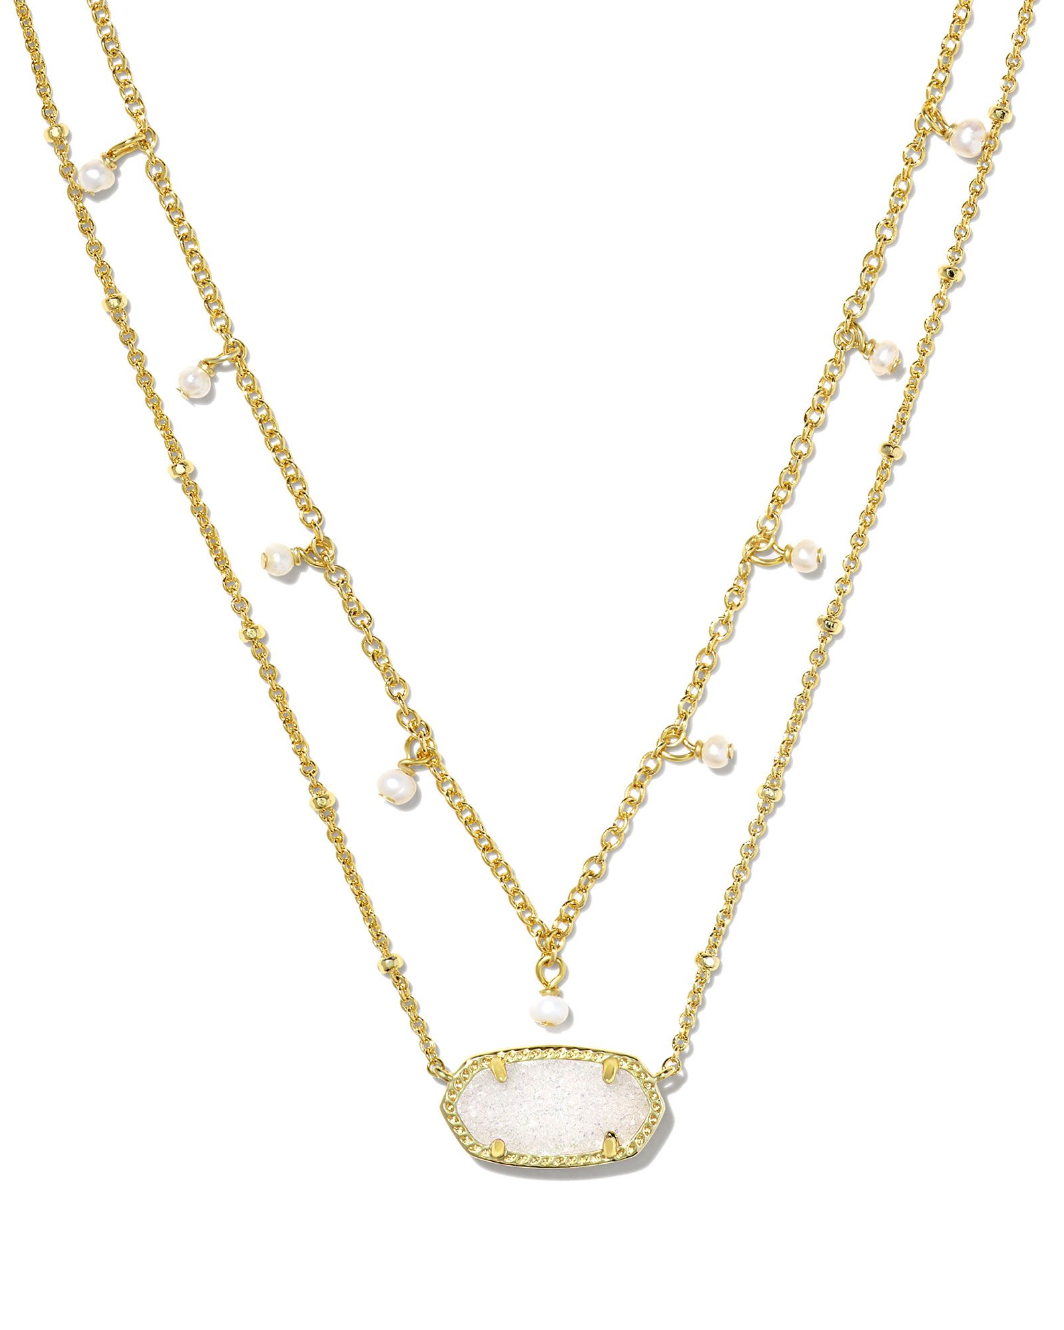 Elisa Pearl Multi-Strand Necklace in Gold Iridescent Drusy